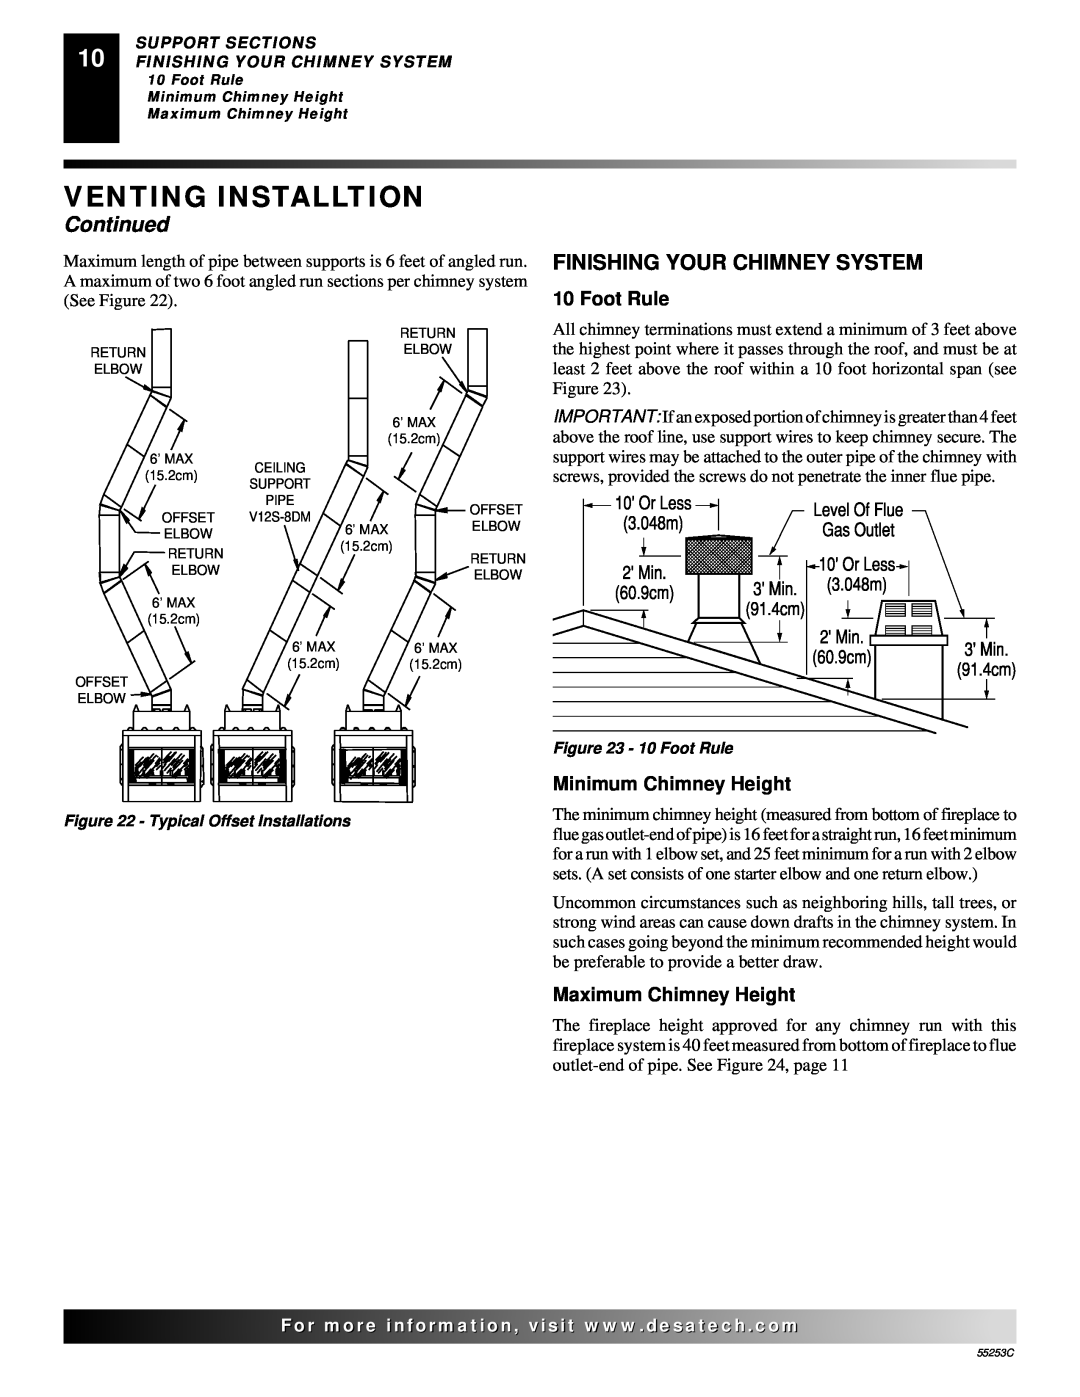 Desa V3610ST manual Venting Installtion, Continued, Finishing Your Chimney System, Foot Rule, Minimum Chimney Height 